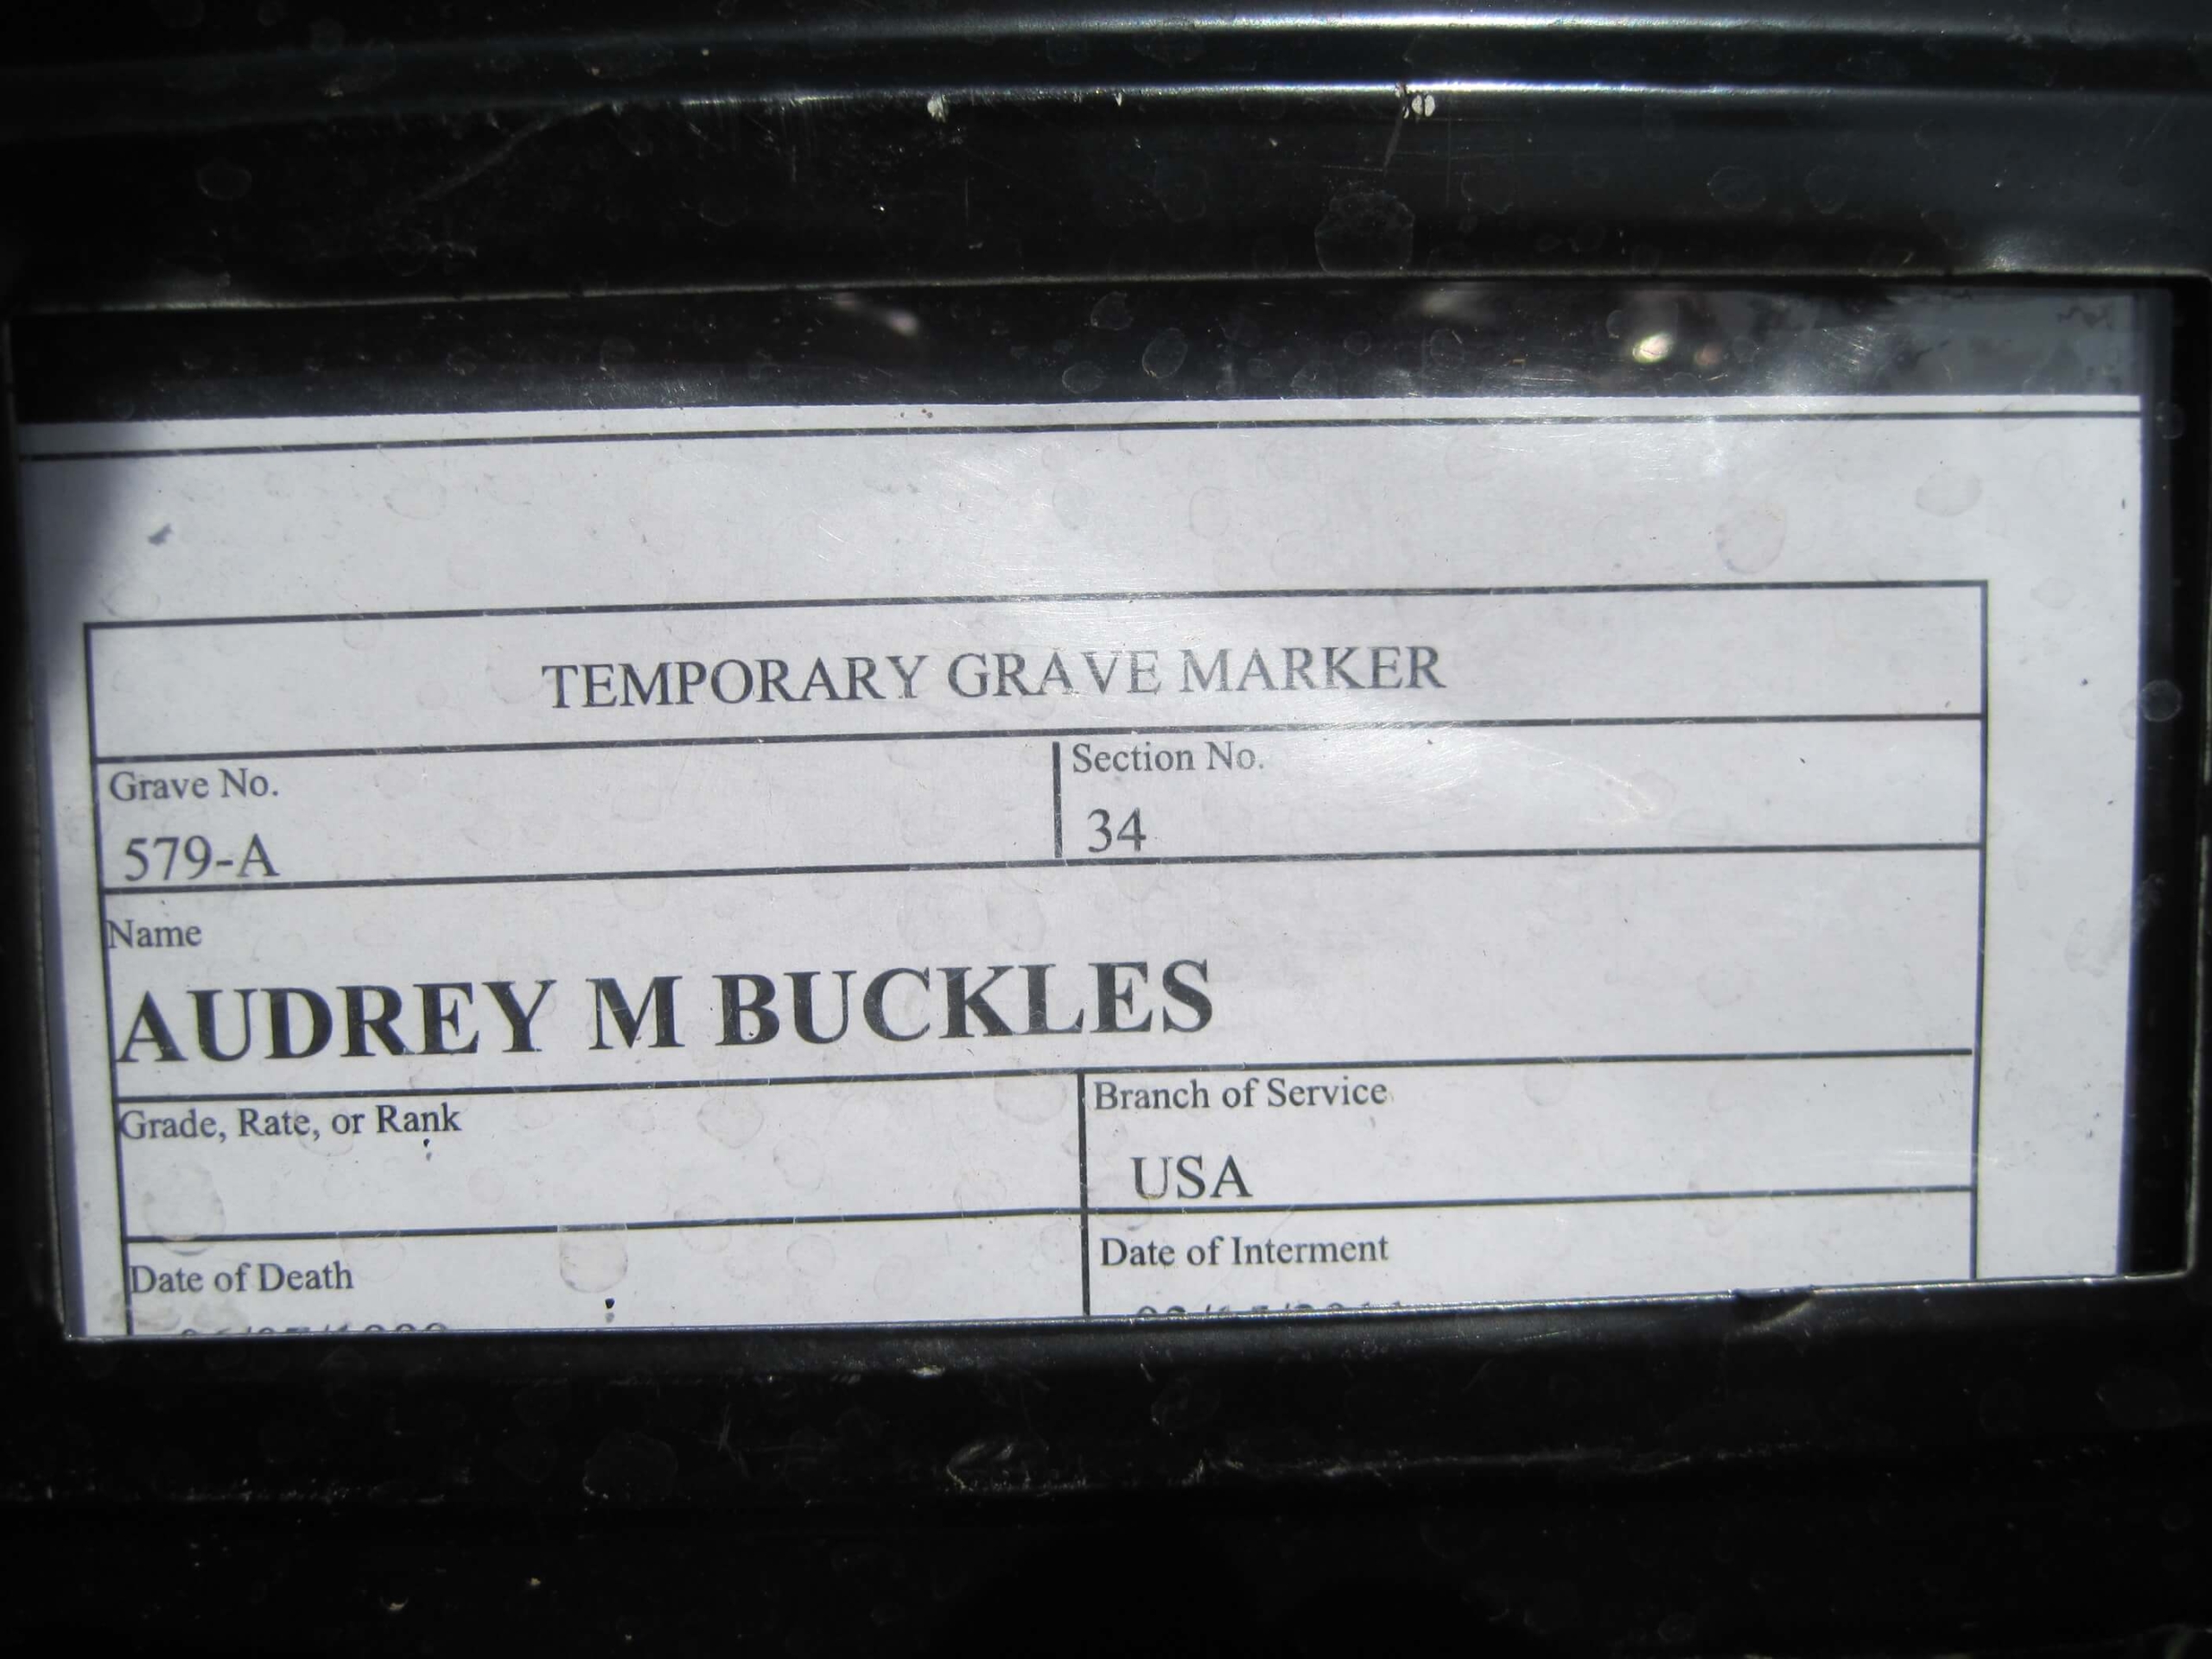 ambuckles-gravesite-photo-by-eileen-horan-march-2011-001